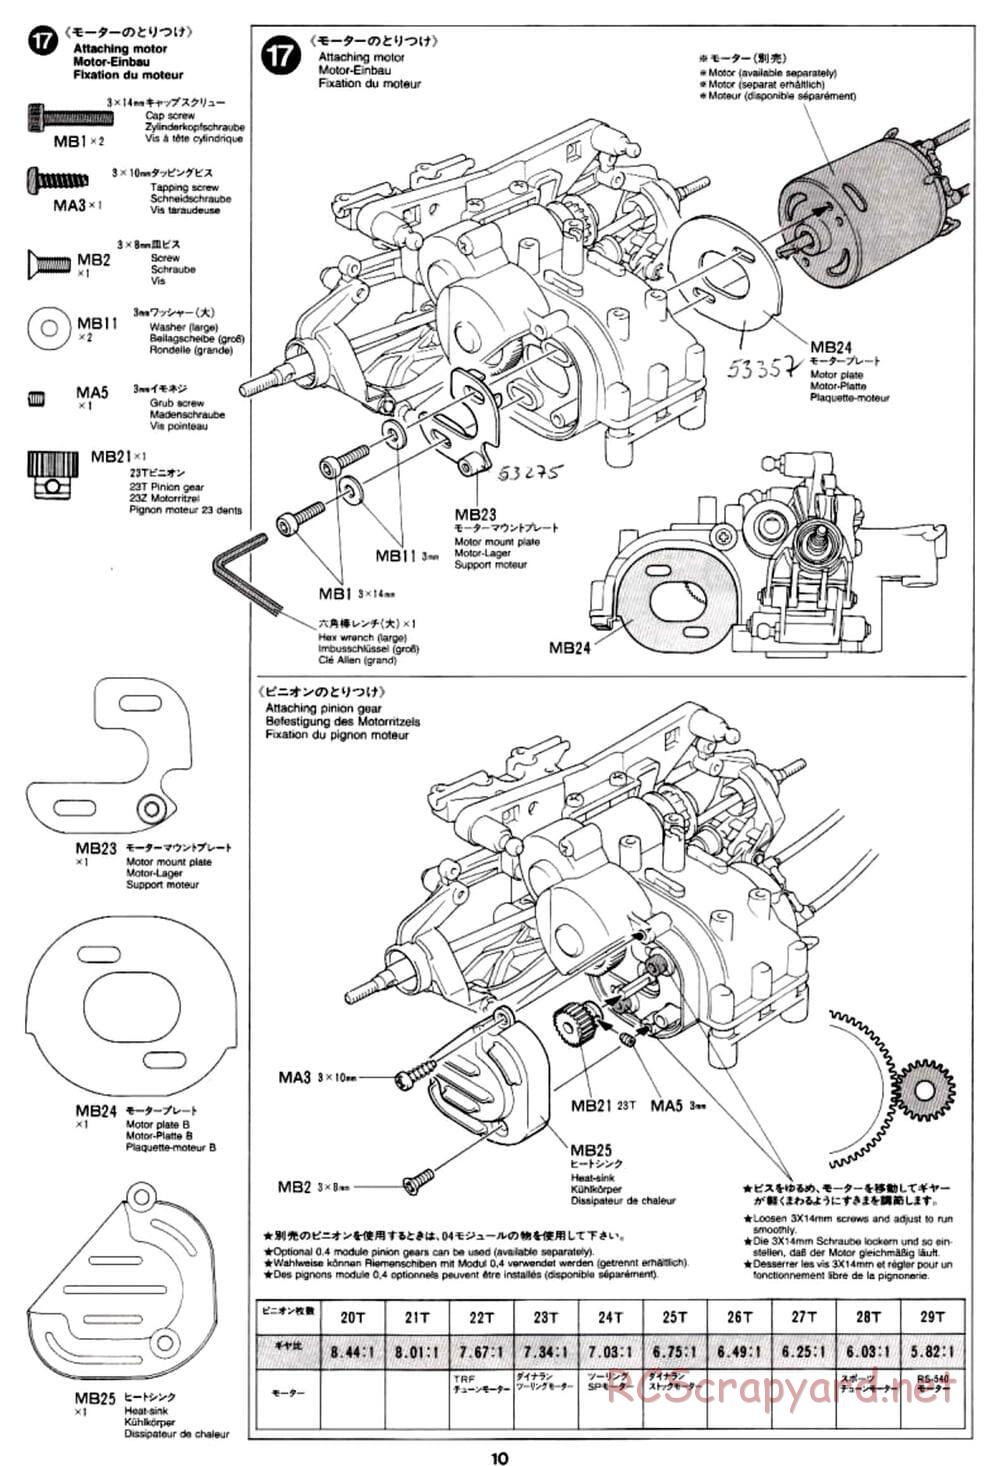 Tamiya - TA-03R TRF Special Edition Chassis - Manual - Page 10